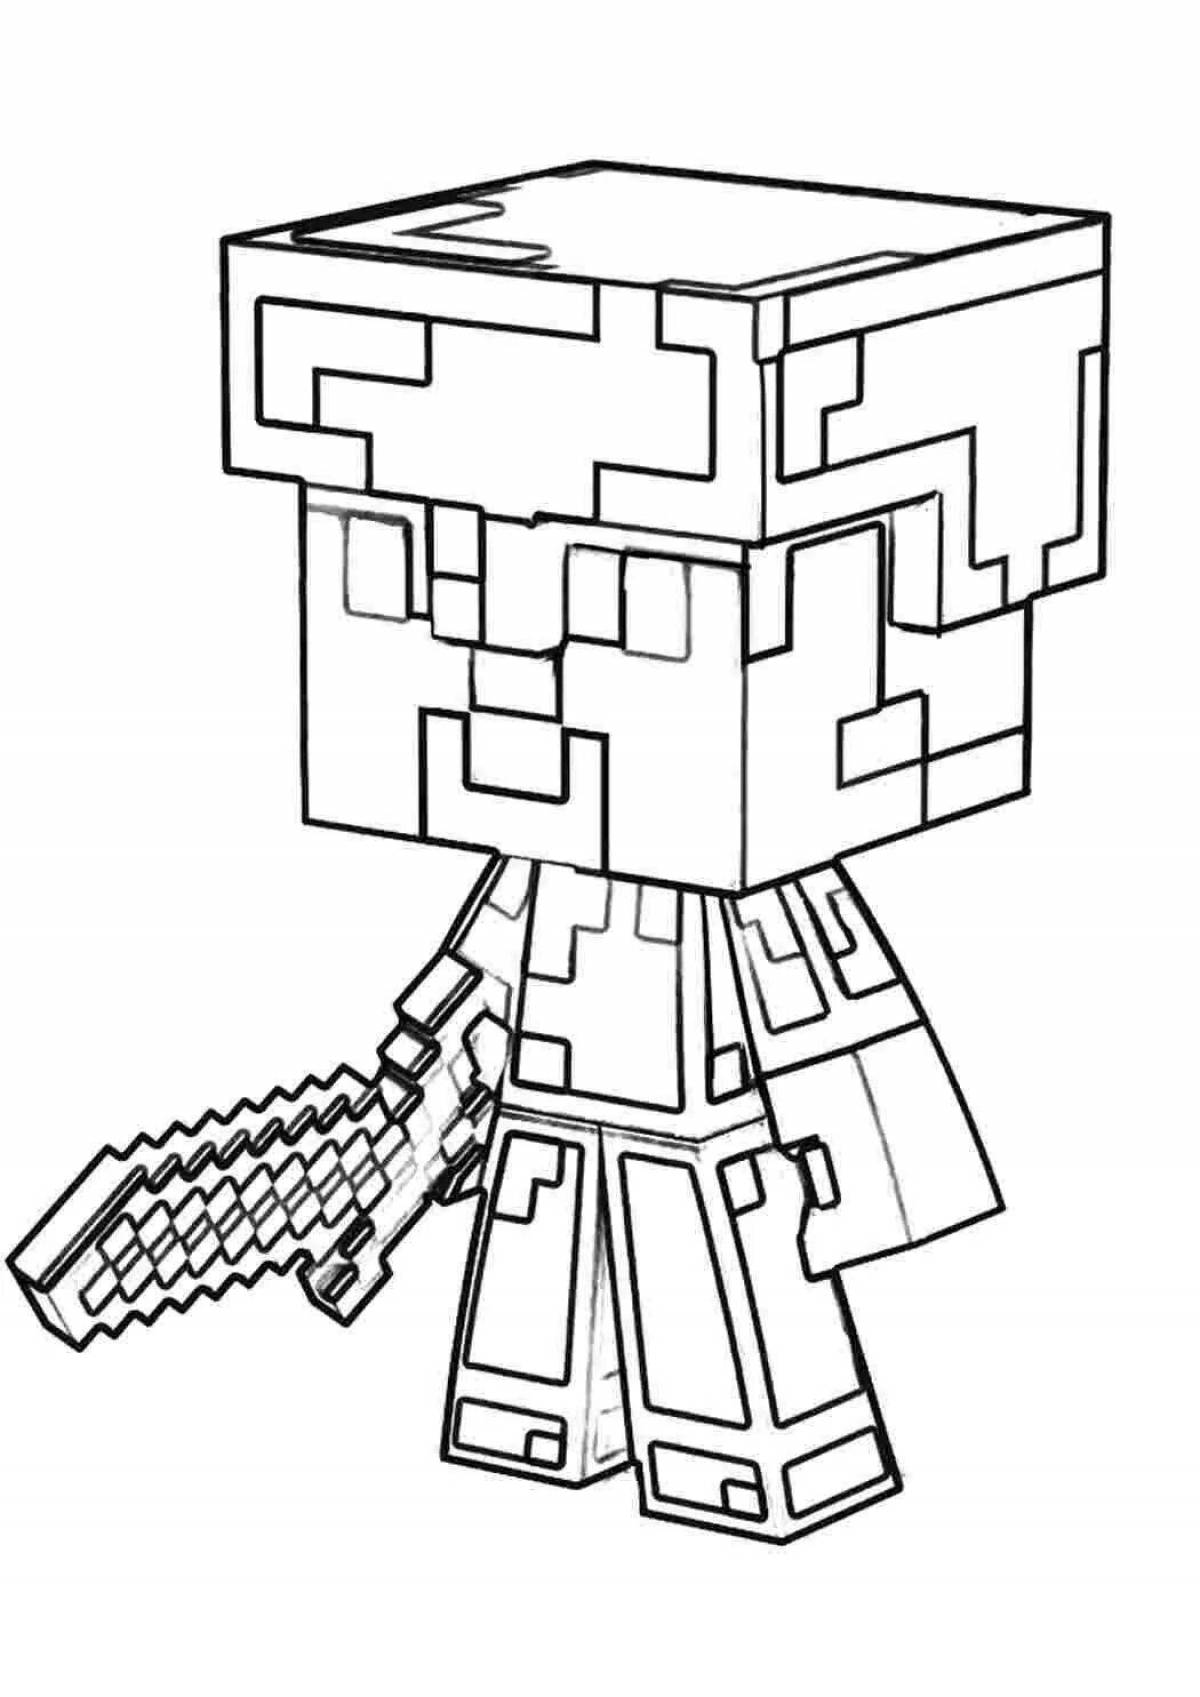 Awesome minecraft dynamite coloring page